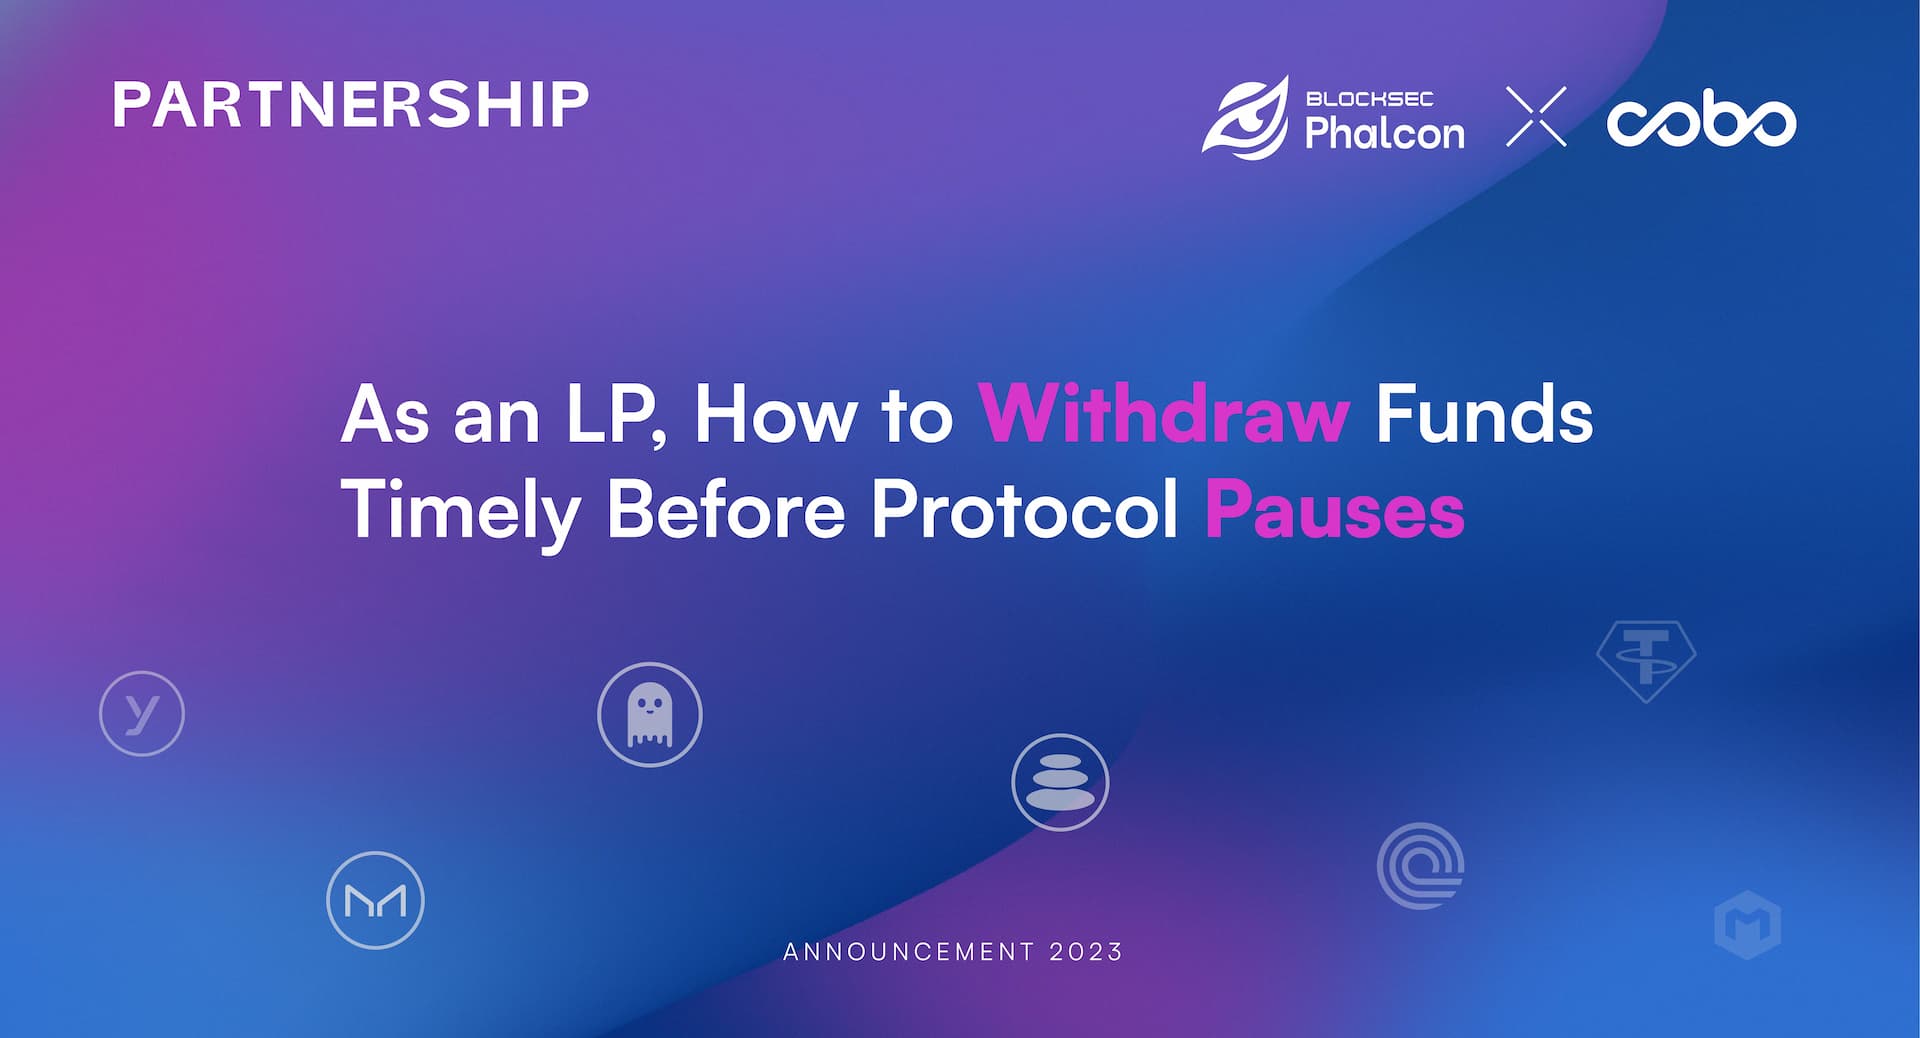 As an LP, How to Withdraw Funds Timely Before Protocol Pauses